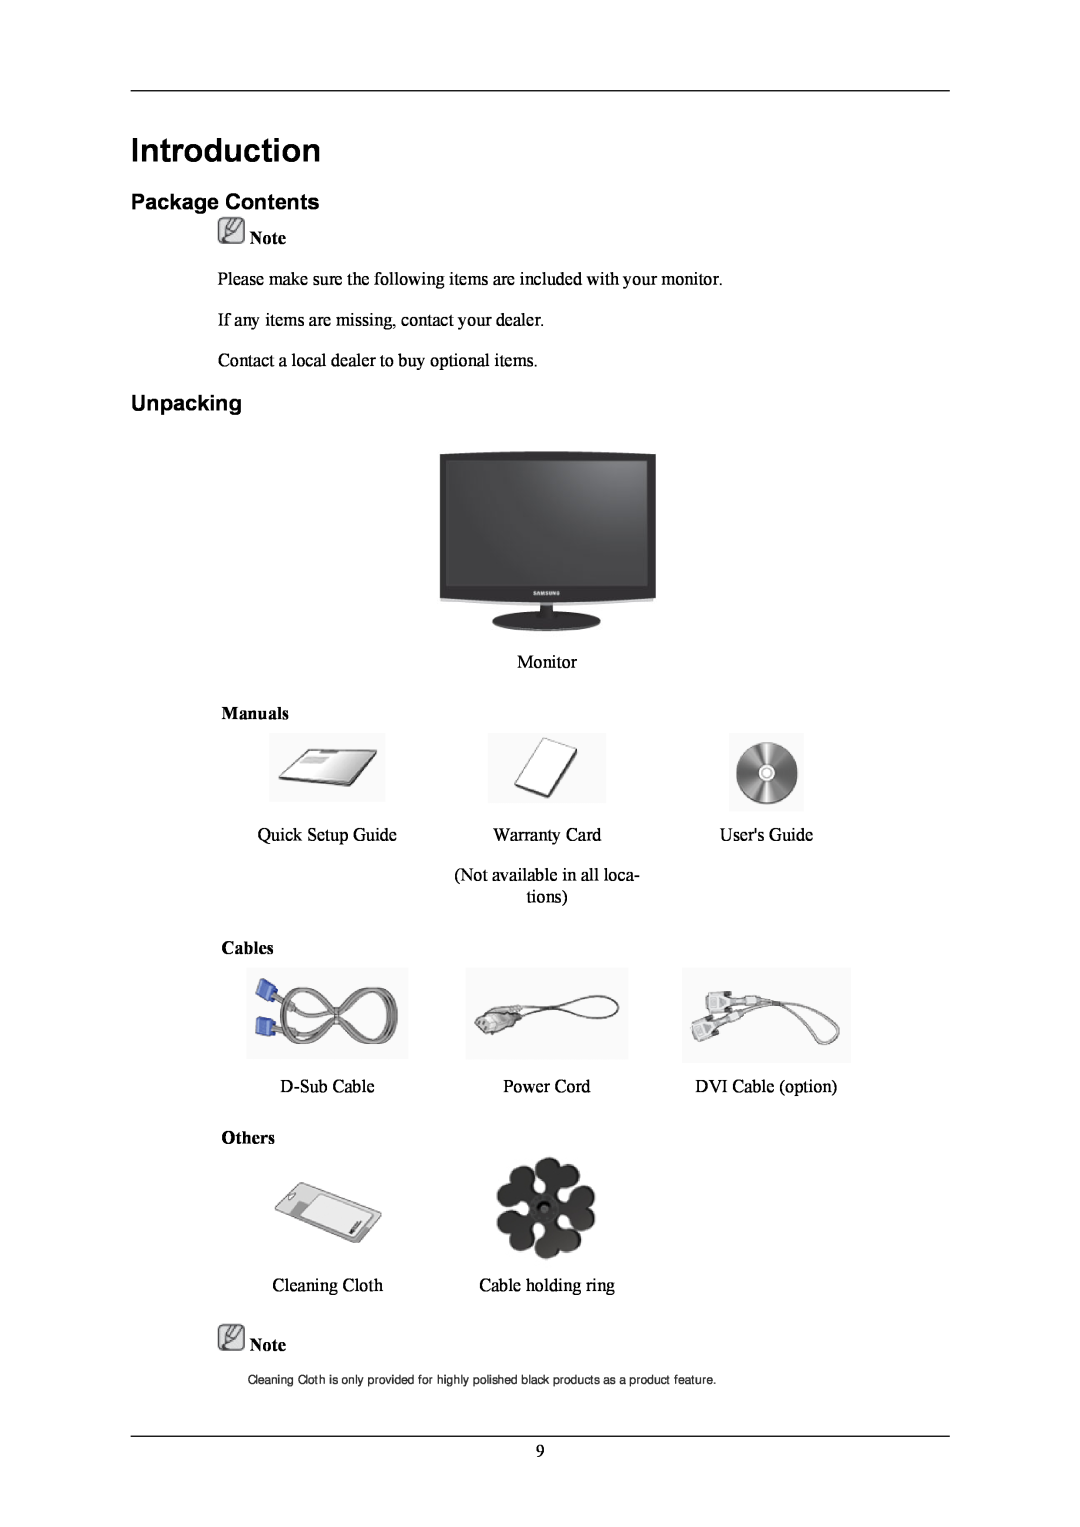 Samsung 2433BW user manual Introduction, Package Contents, Unpacking 